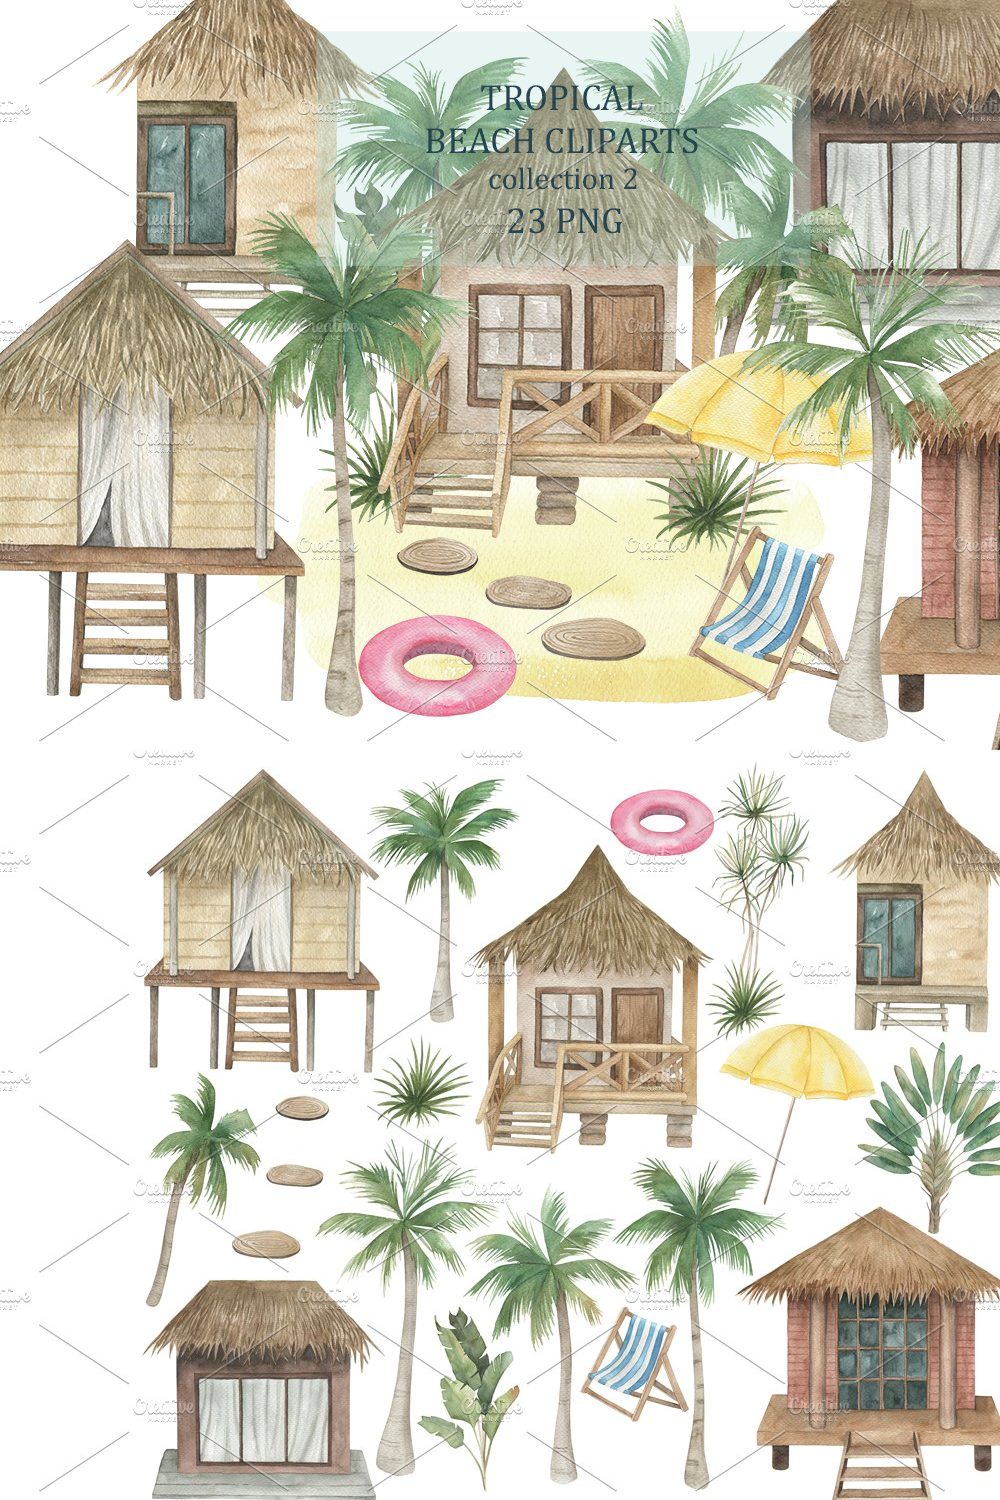 Tropical Beach Cliparts Collection2 pinterest preview image.